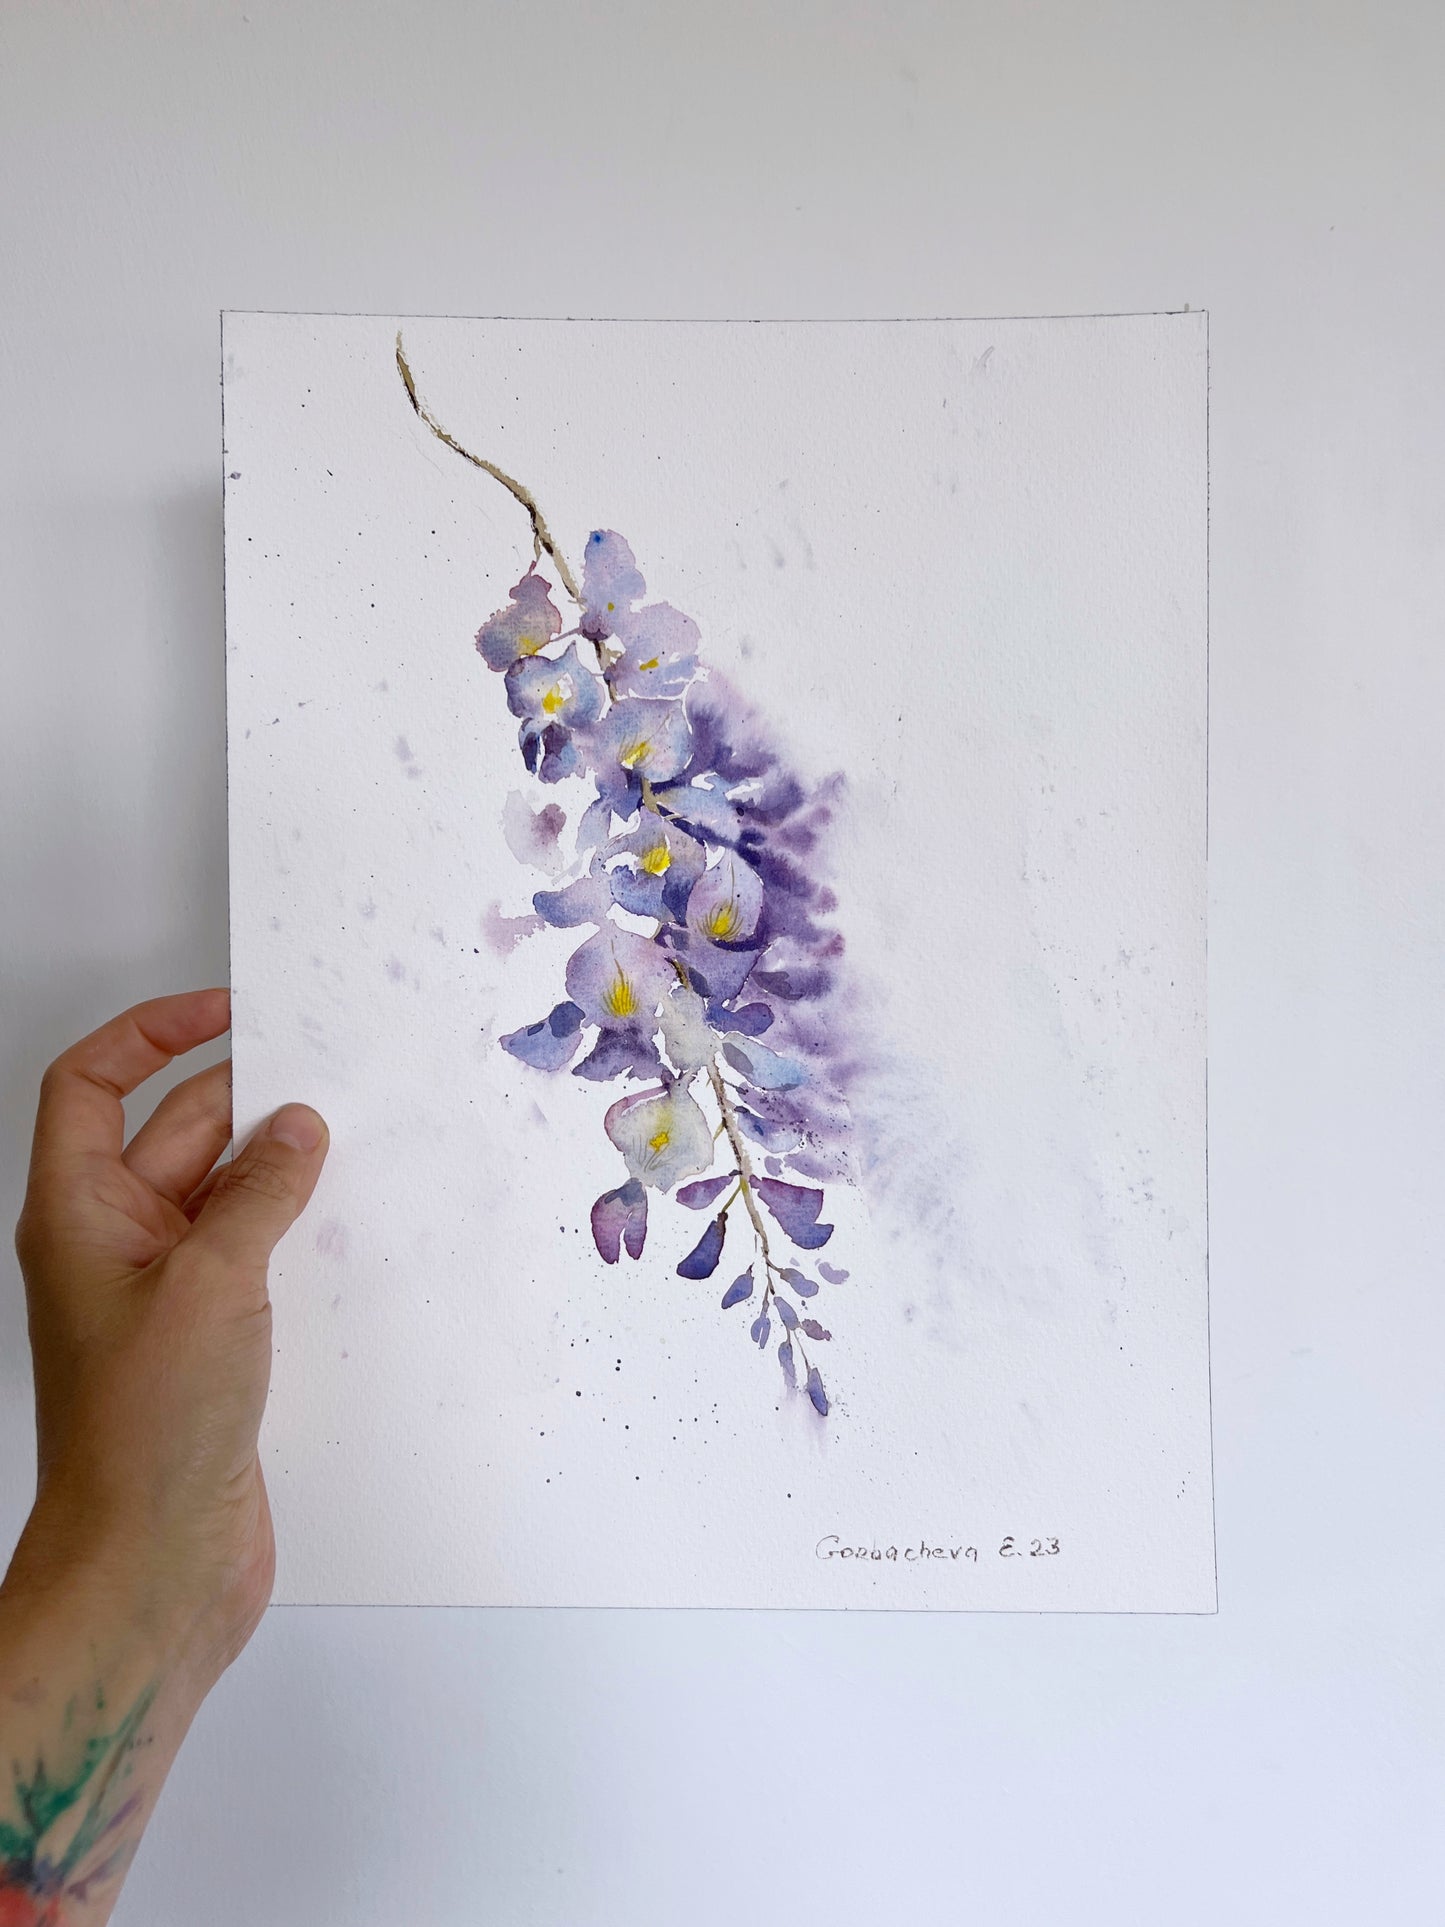 Wisteria Painting, Watercolor Flower Original Art, Lilac flowers Wall Decor, Botanical Illustration, Gift Ideas